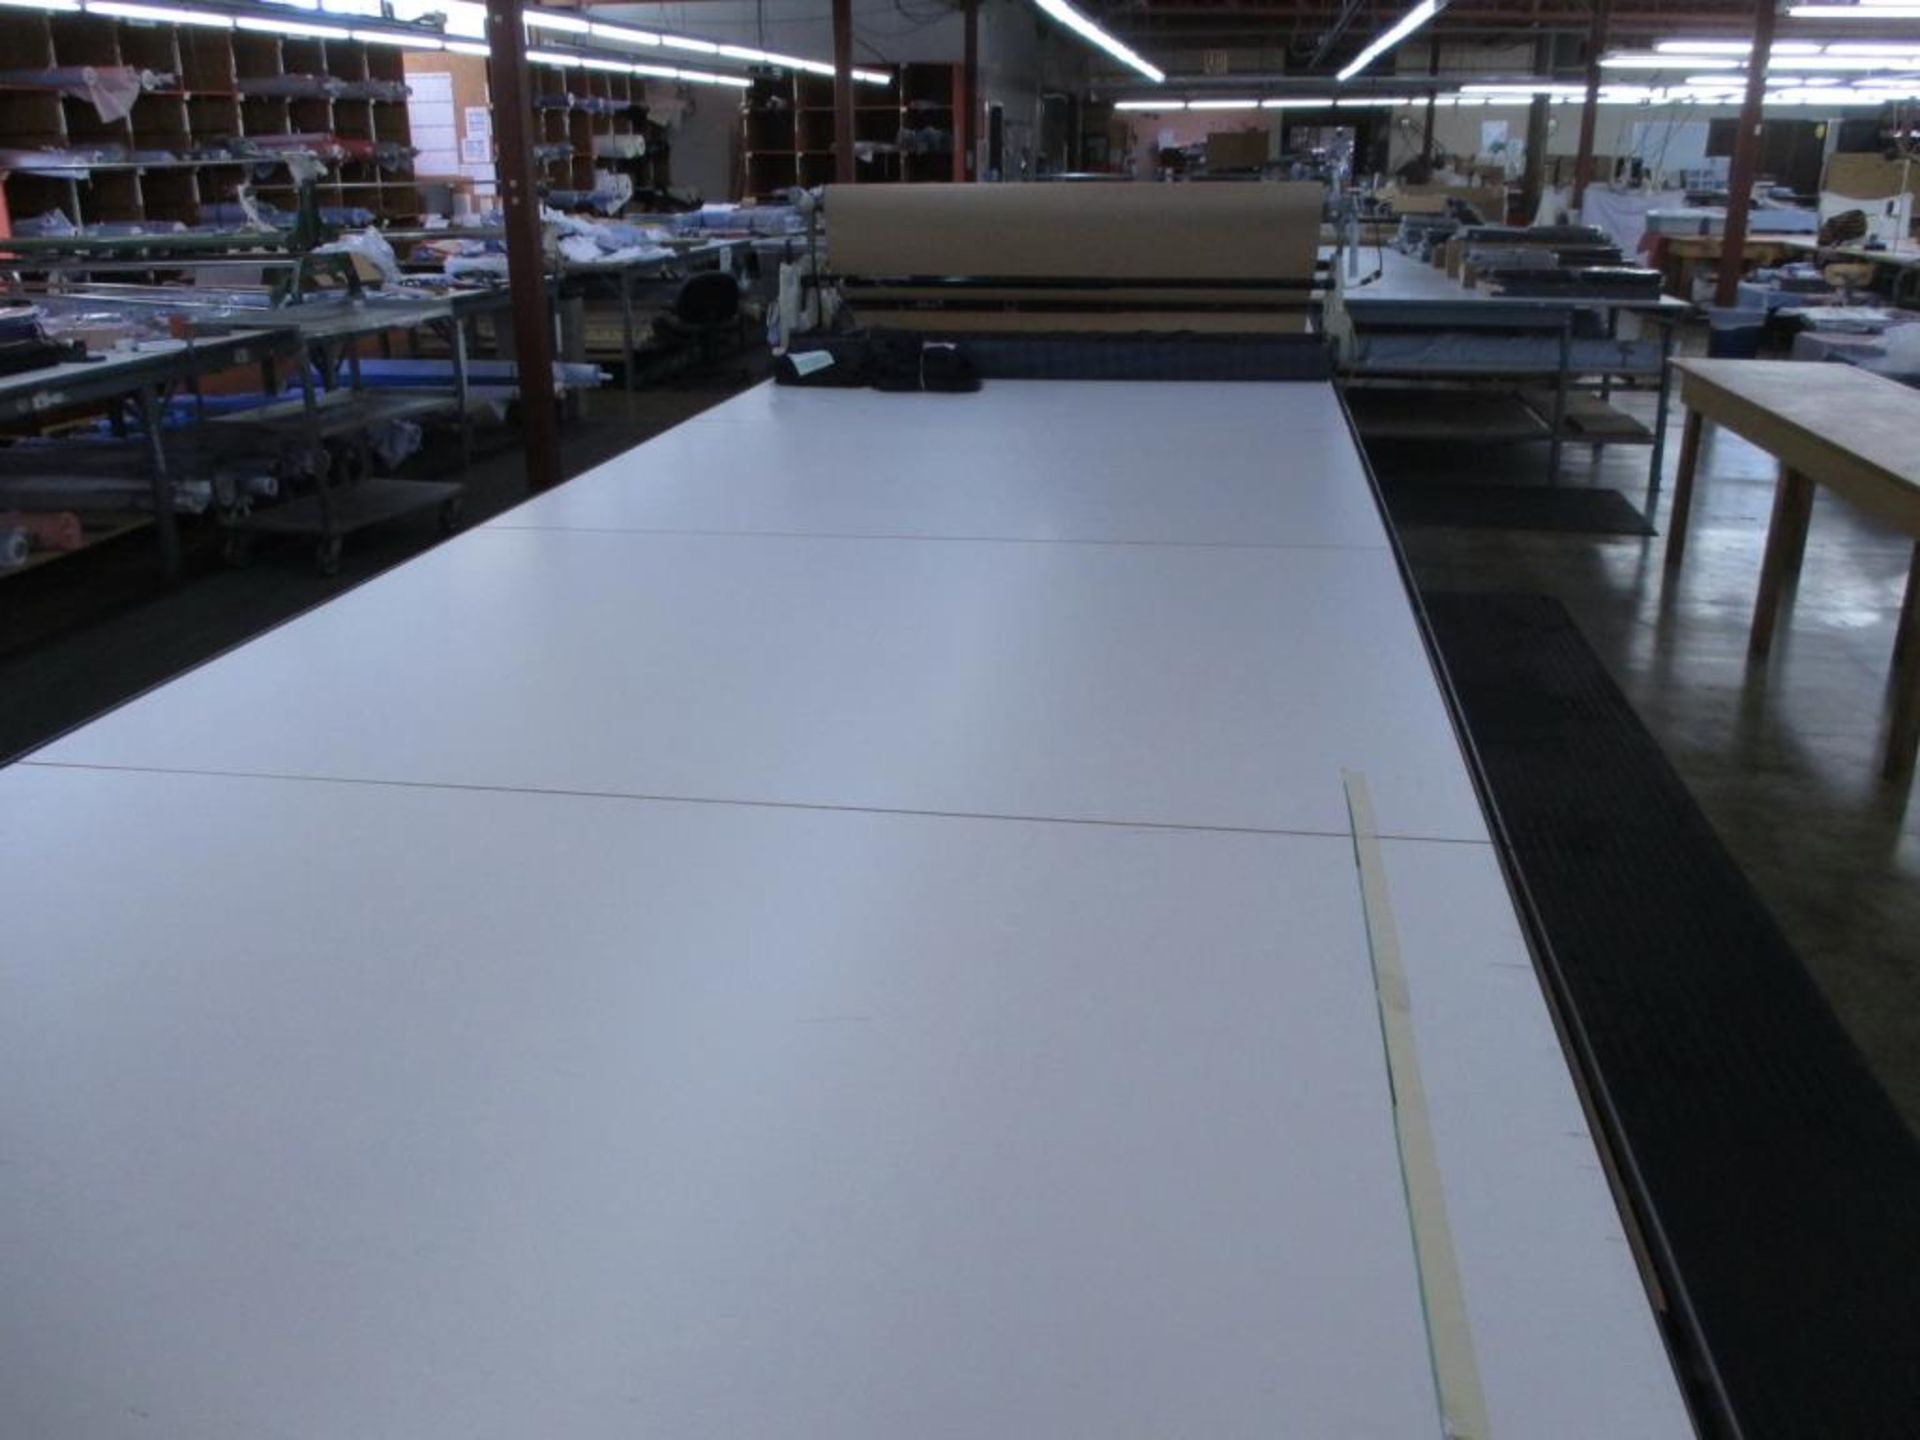 Fabric Cutting Table with Rollers. Fabric Cutting Table (47' x 67"W) with (2) Mobile Fabric Rollers, - Image 3 of 11